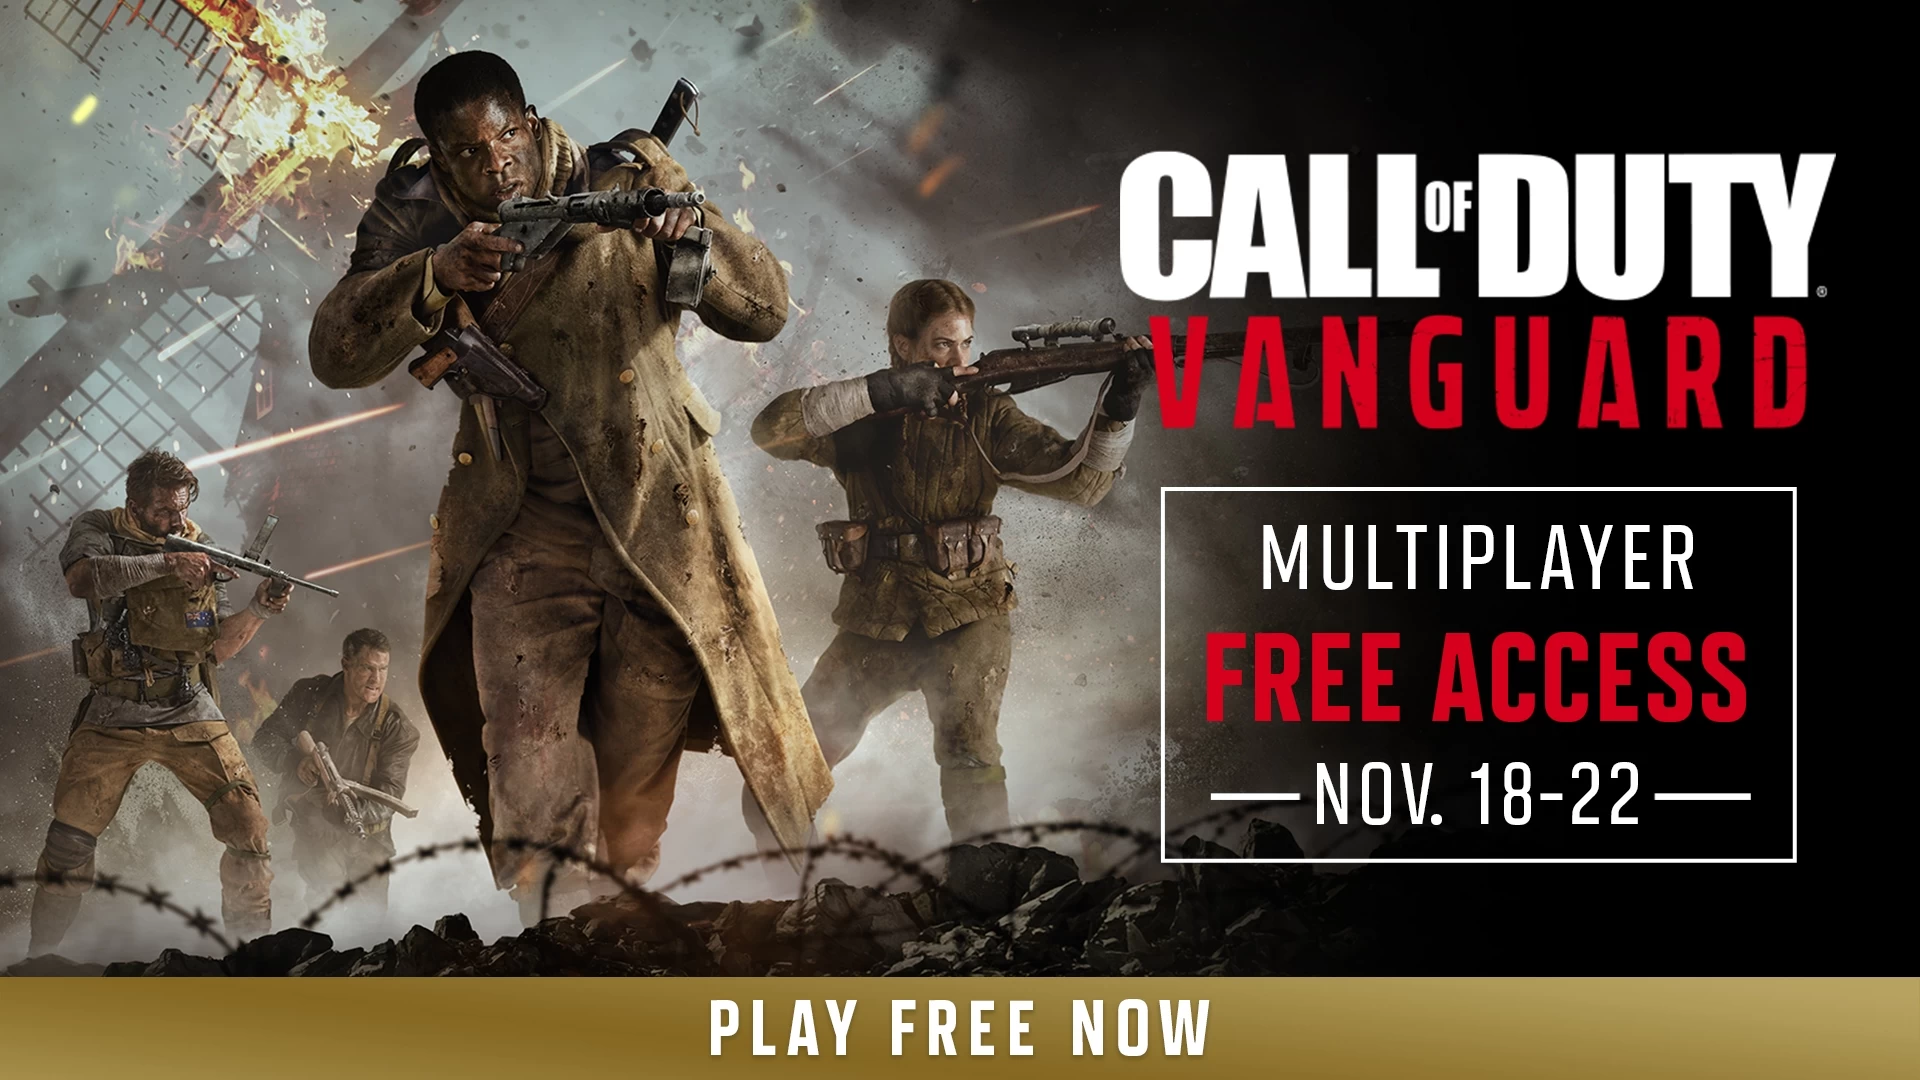 Everyone can play Call of Duty: Vanguard for free until November 22